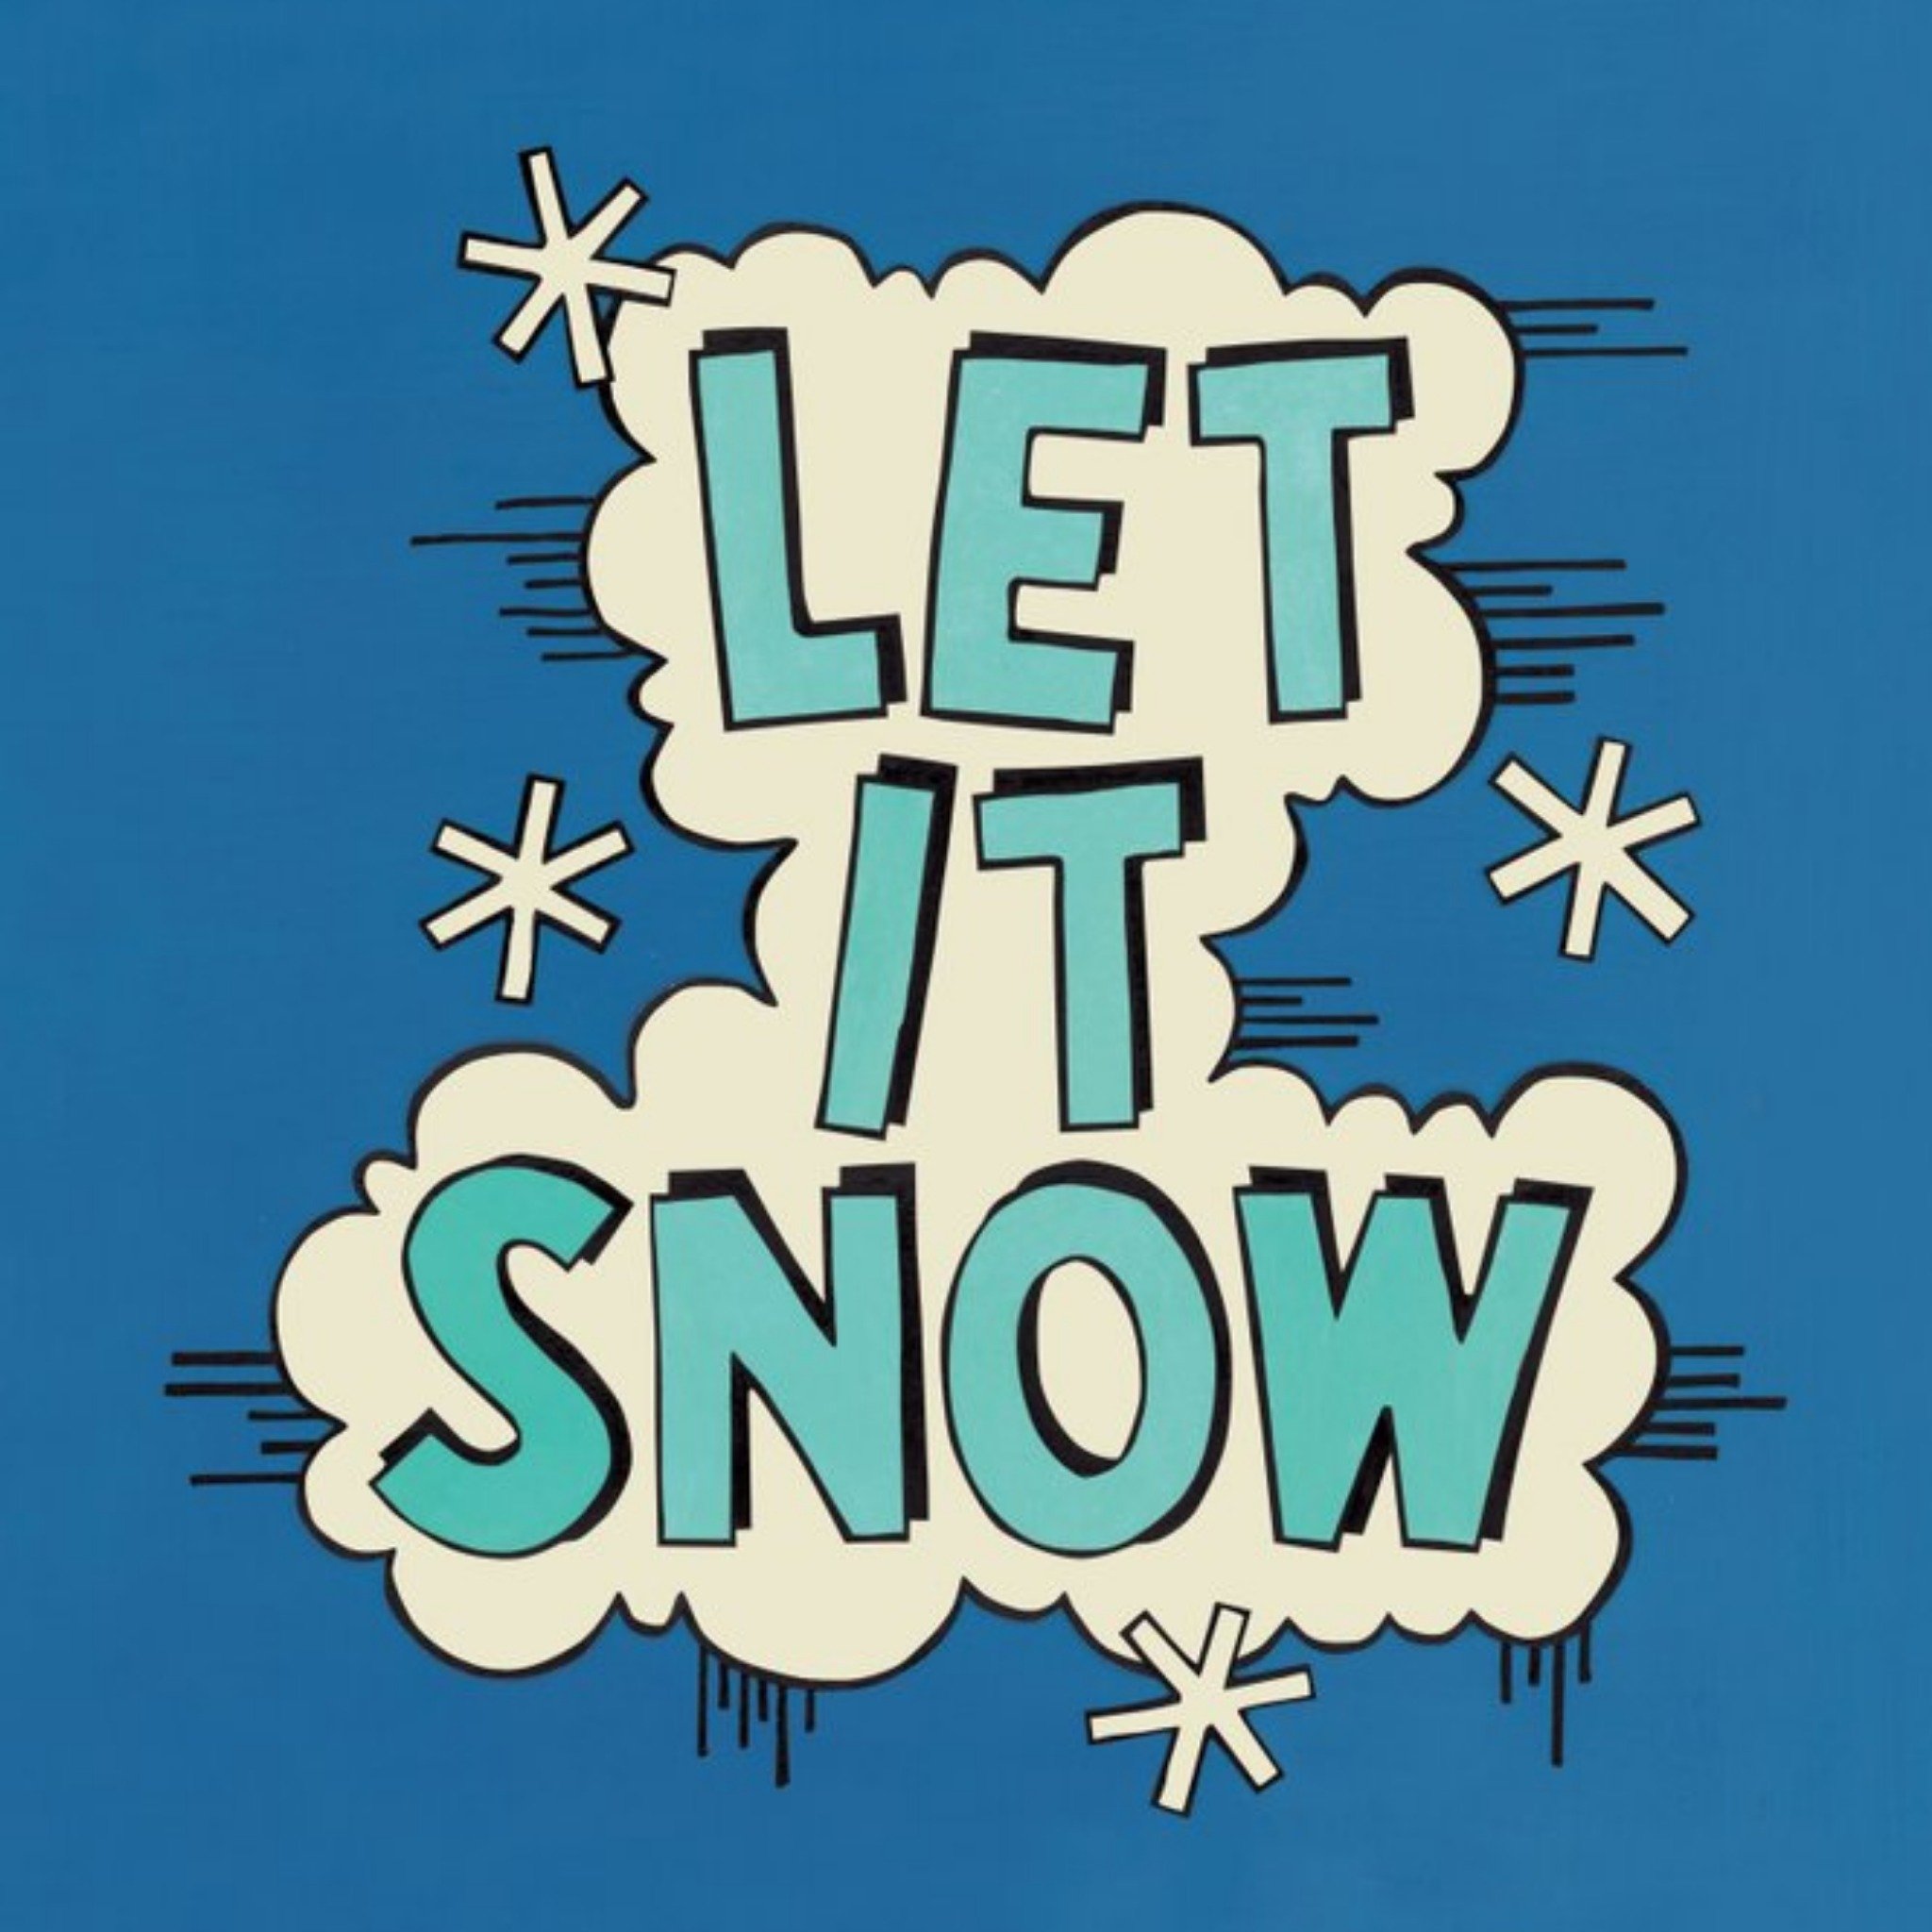 Moonpig Comic Book Style Let It Snow Christmas Card, Large